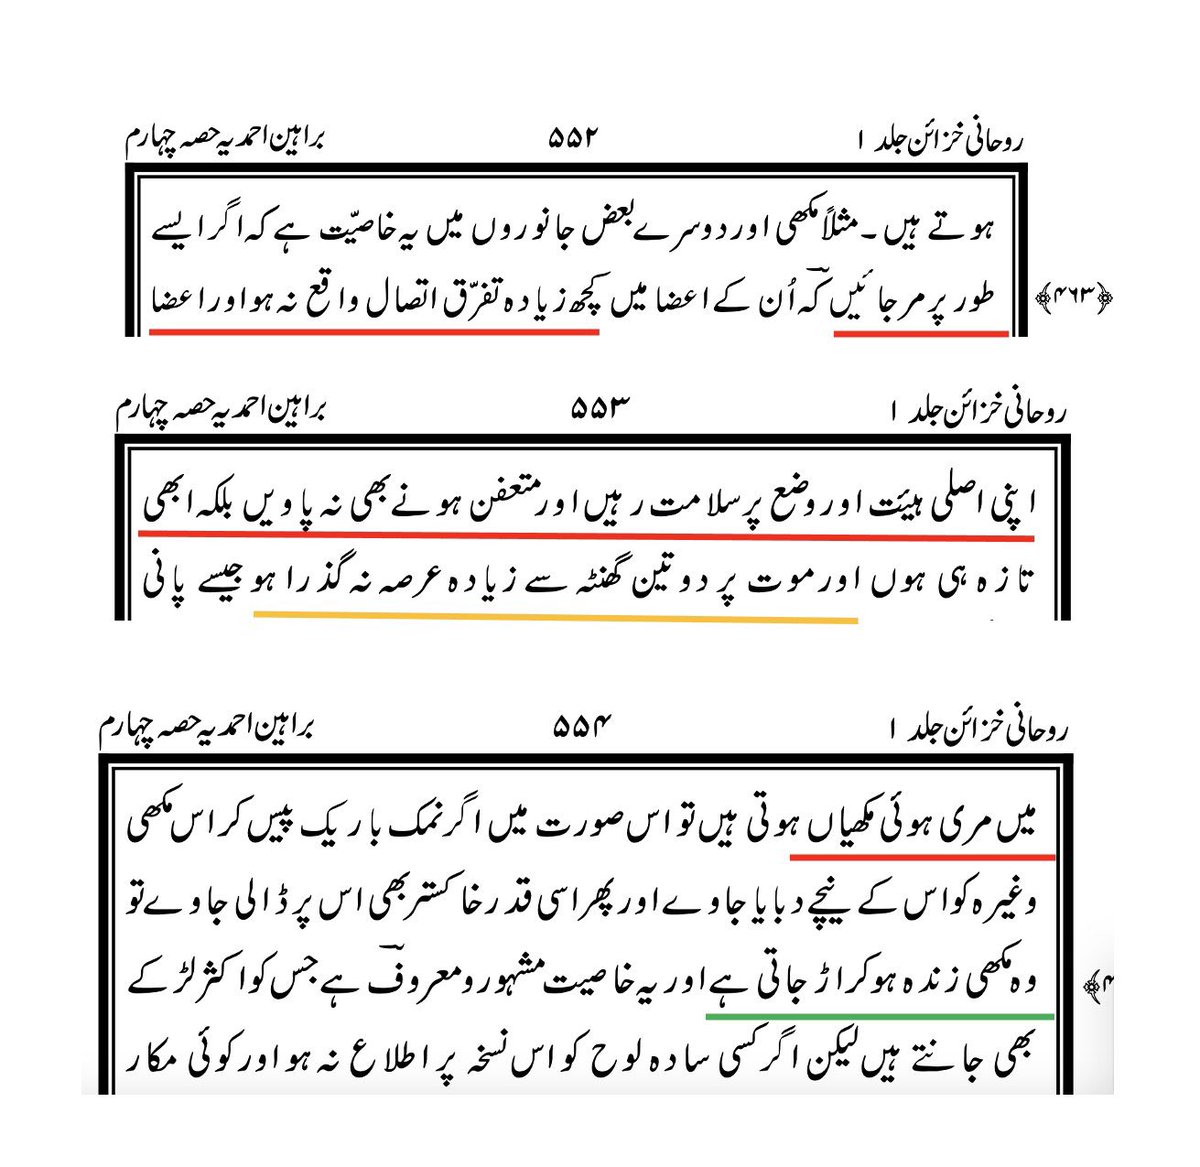 HISTORIC MOMENT HAS COME. Qadianis are now translating the word “موت” as sleep because “dead flies” have killed Mirza’s prophethood. While they translate the word “توفی” as death to kill Jesus. So sleep is death for Jesus and death is sleep for flies. Qadianis stuck in a quagmire